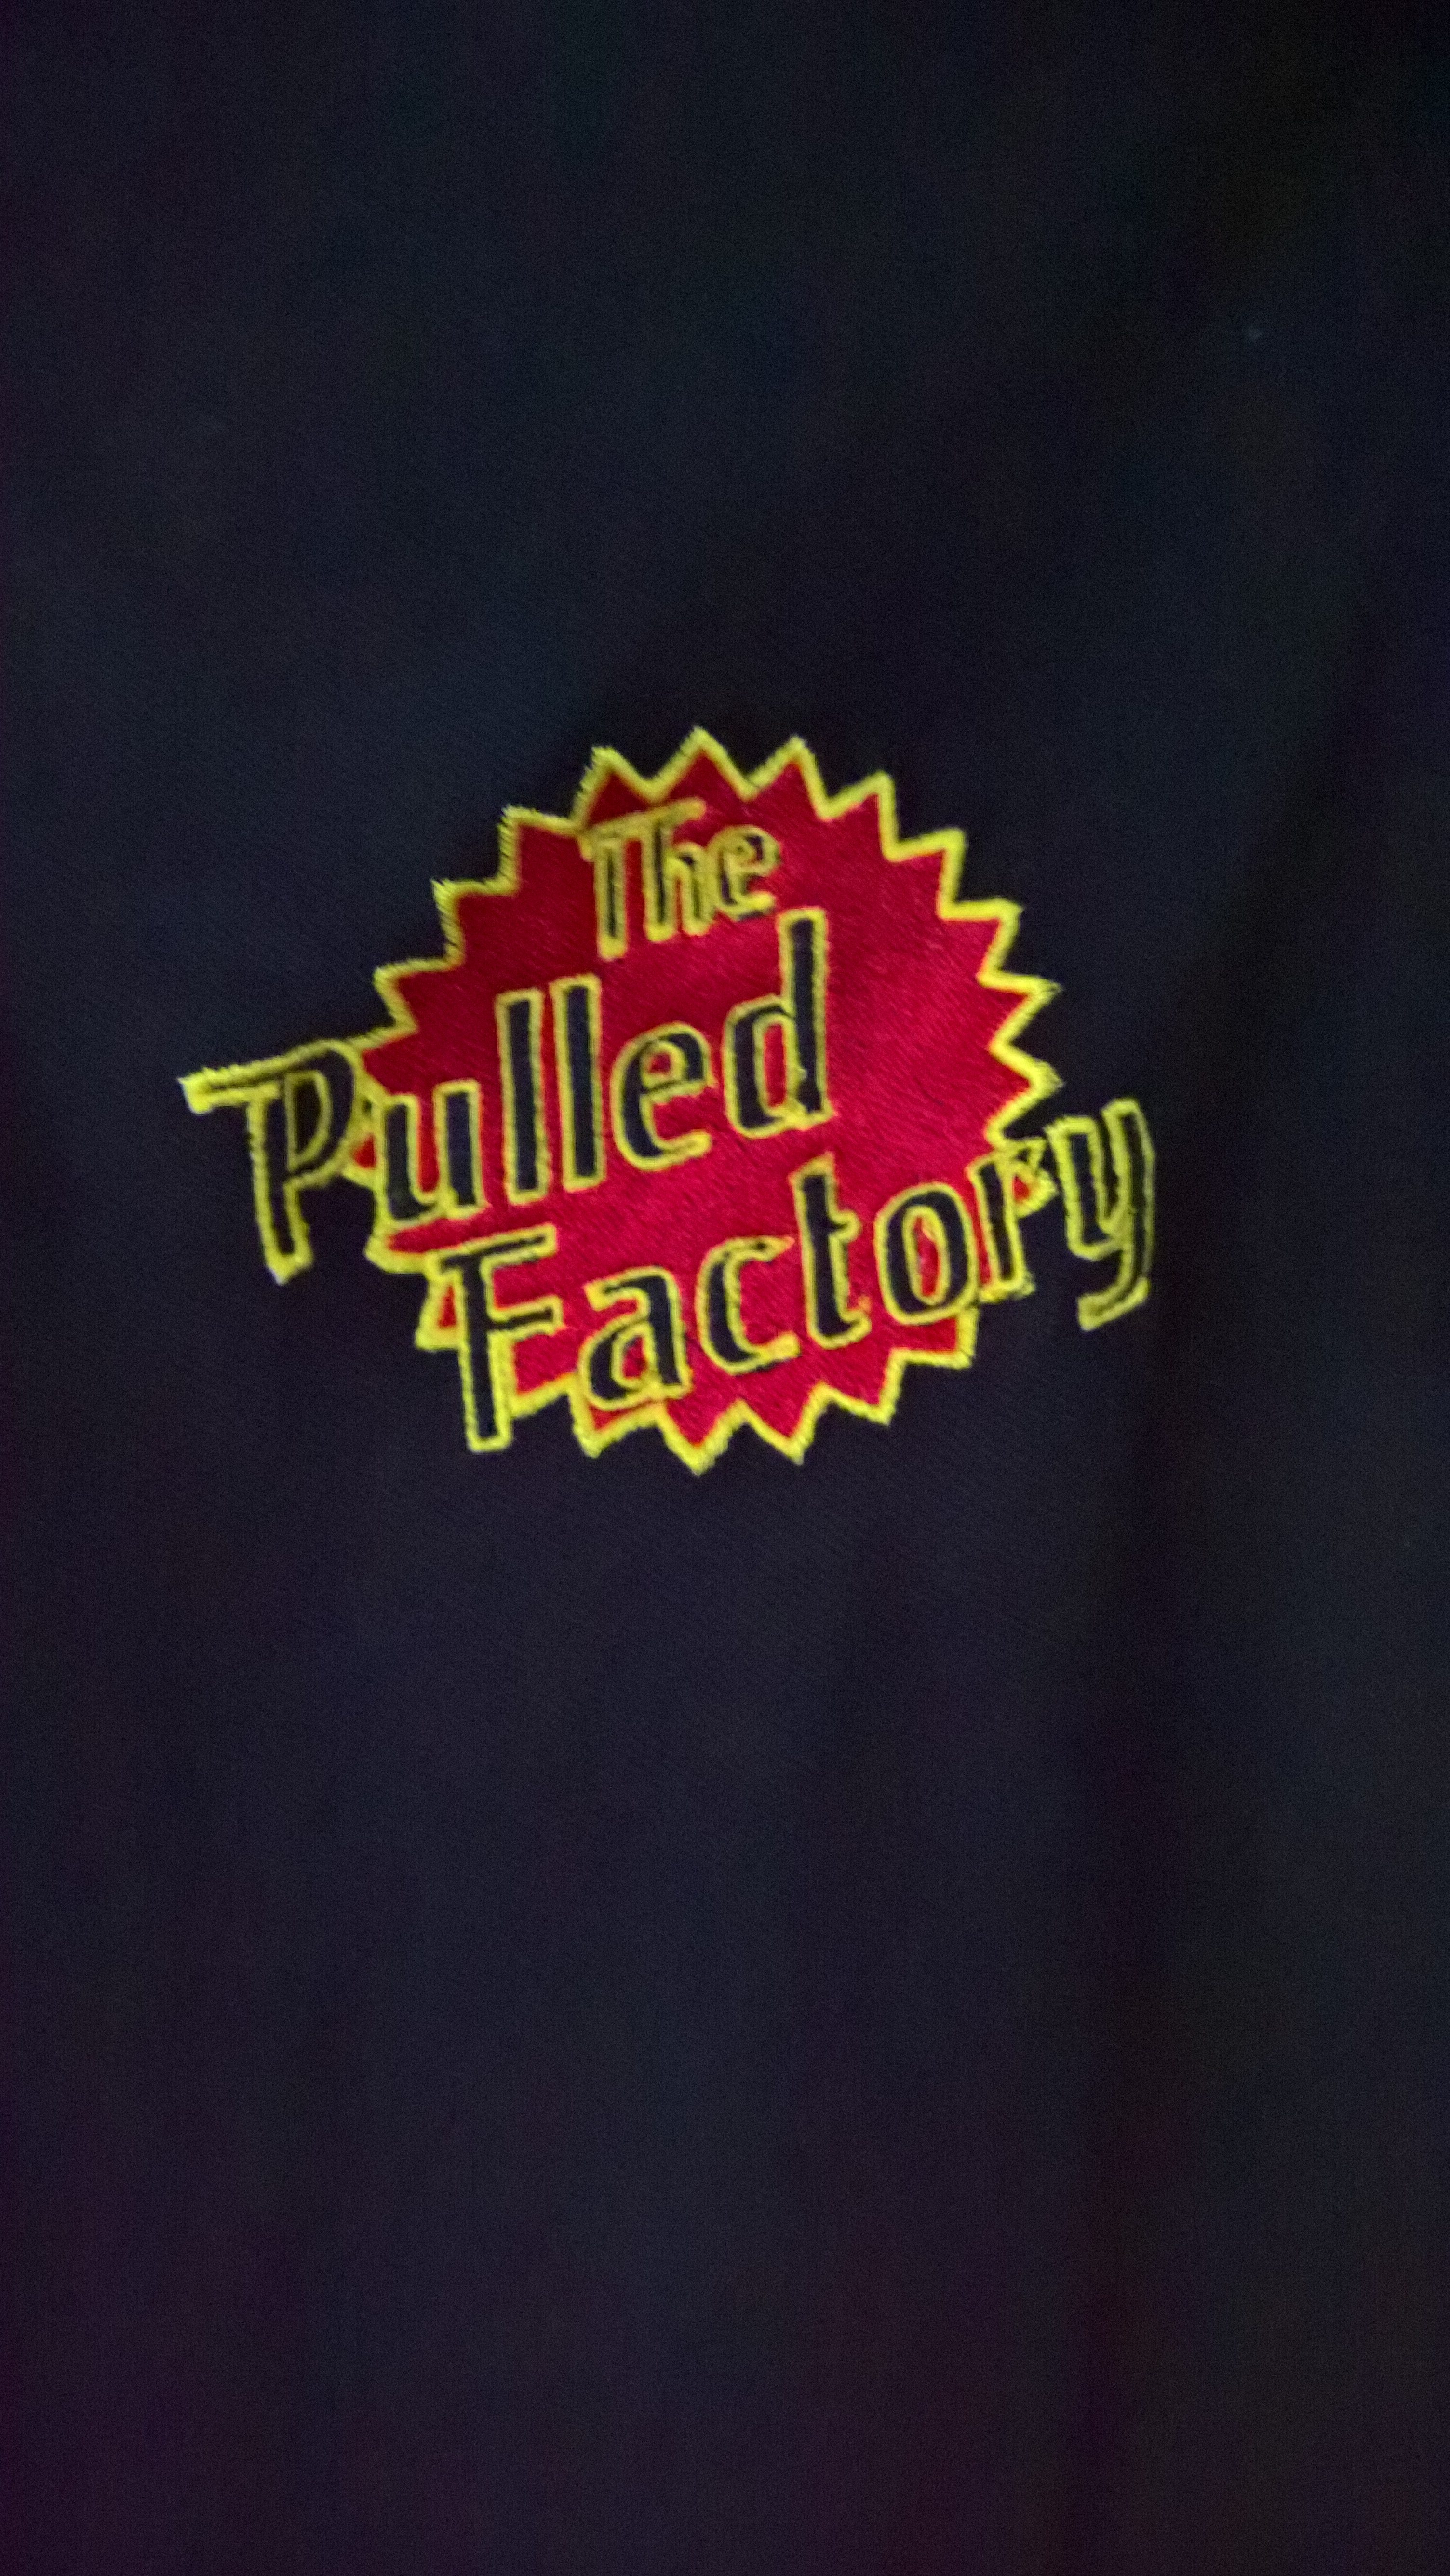 Pulled Factory Logo als Bestickung